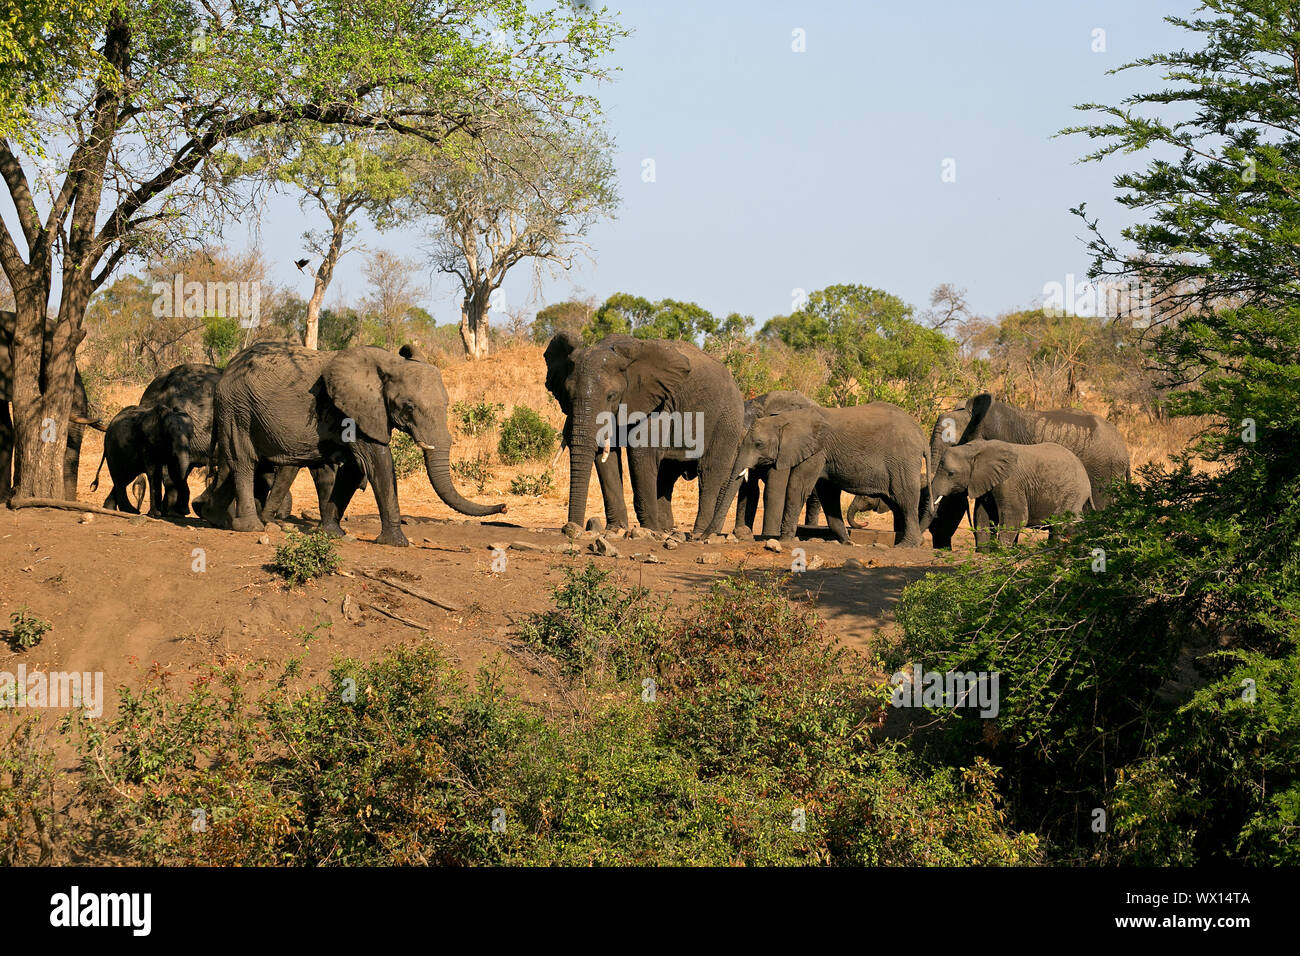 A Herd of elephants drinking at the waterhole Stock Photo